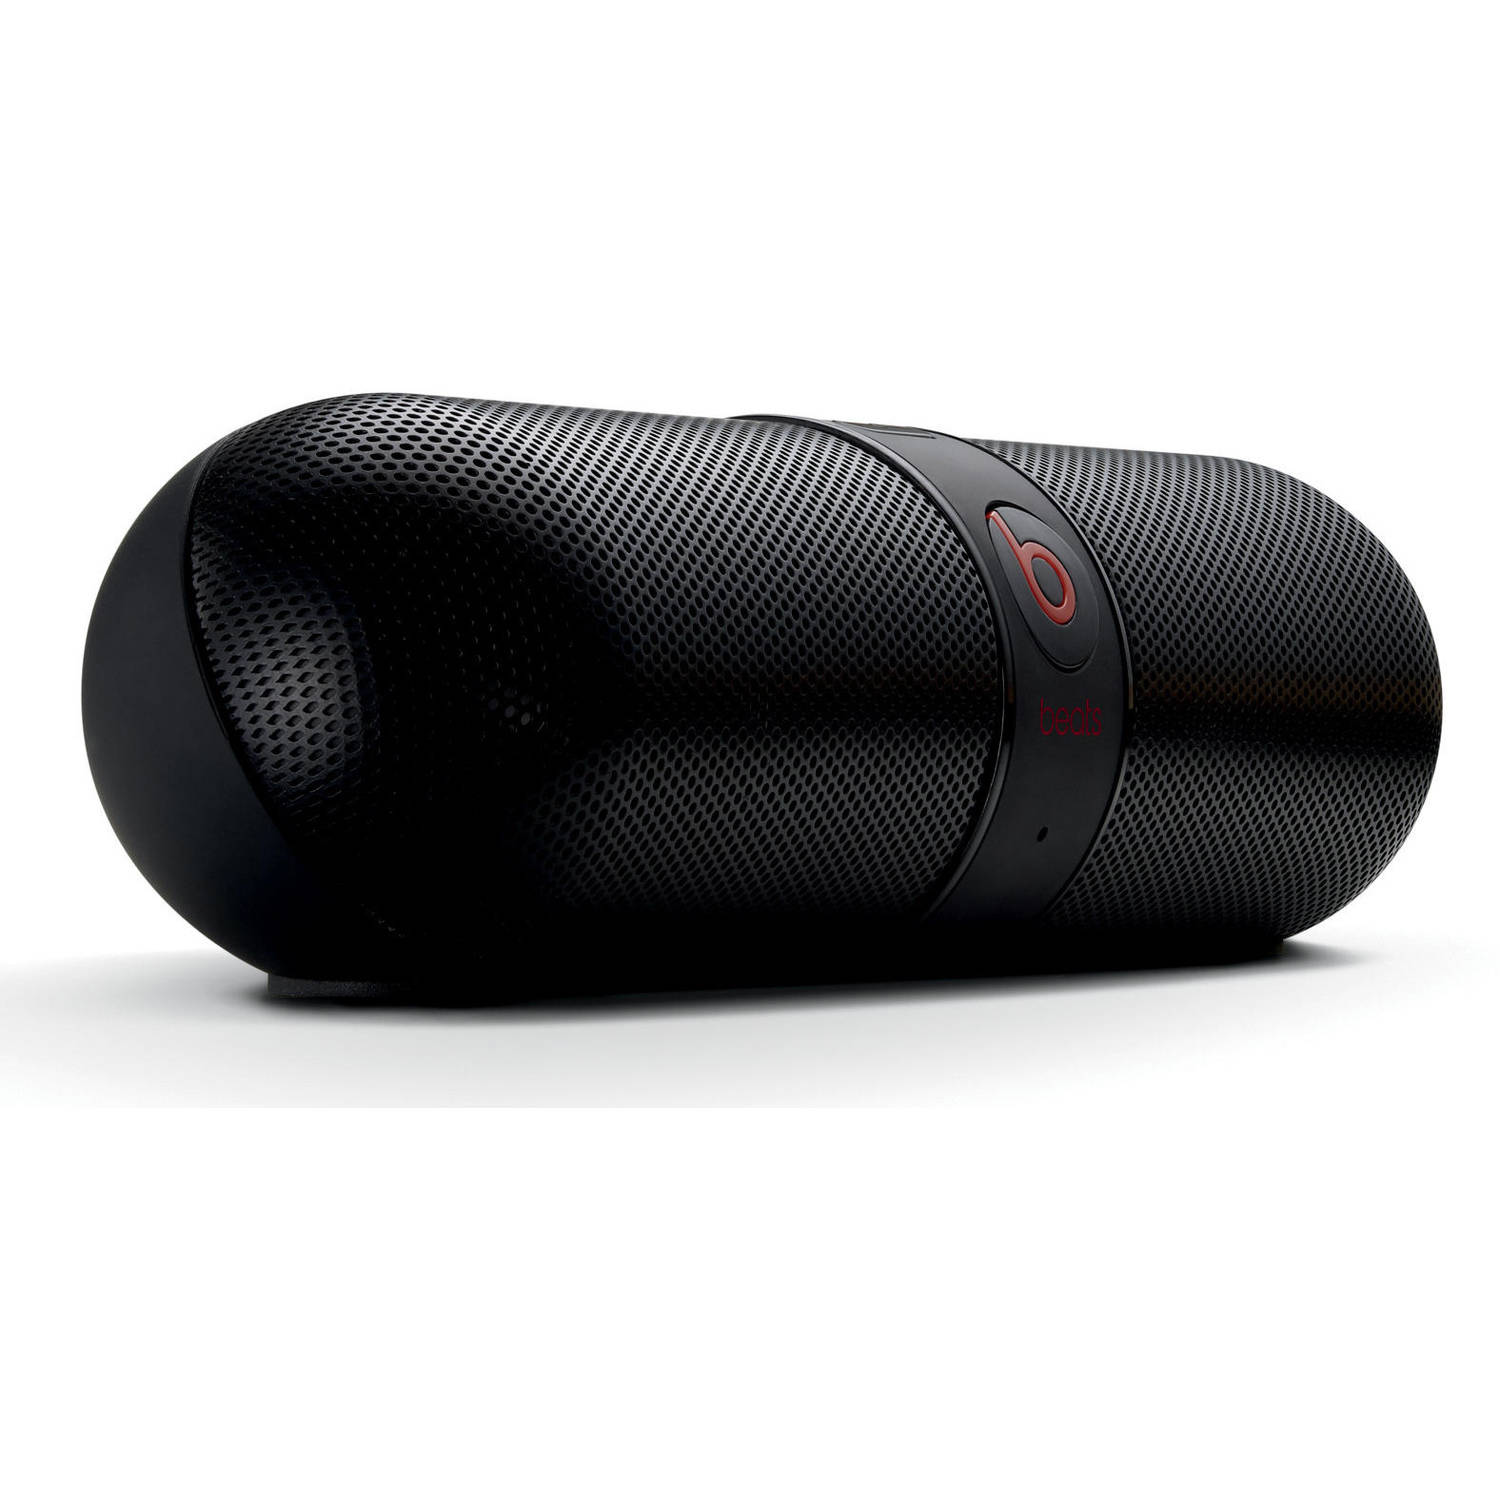 Restored Beats by Dr. Dre Pill Speaker, Assorted Colors (Refurbished) - image 1 of 1